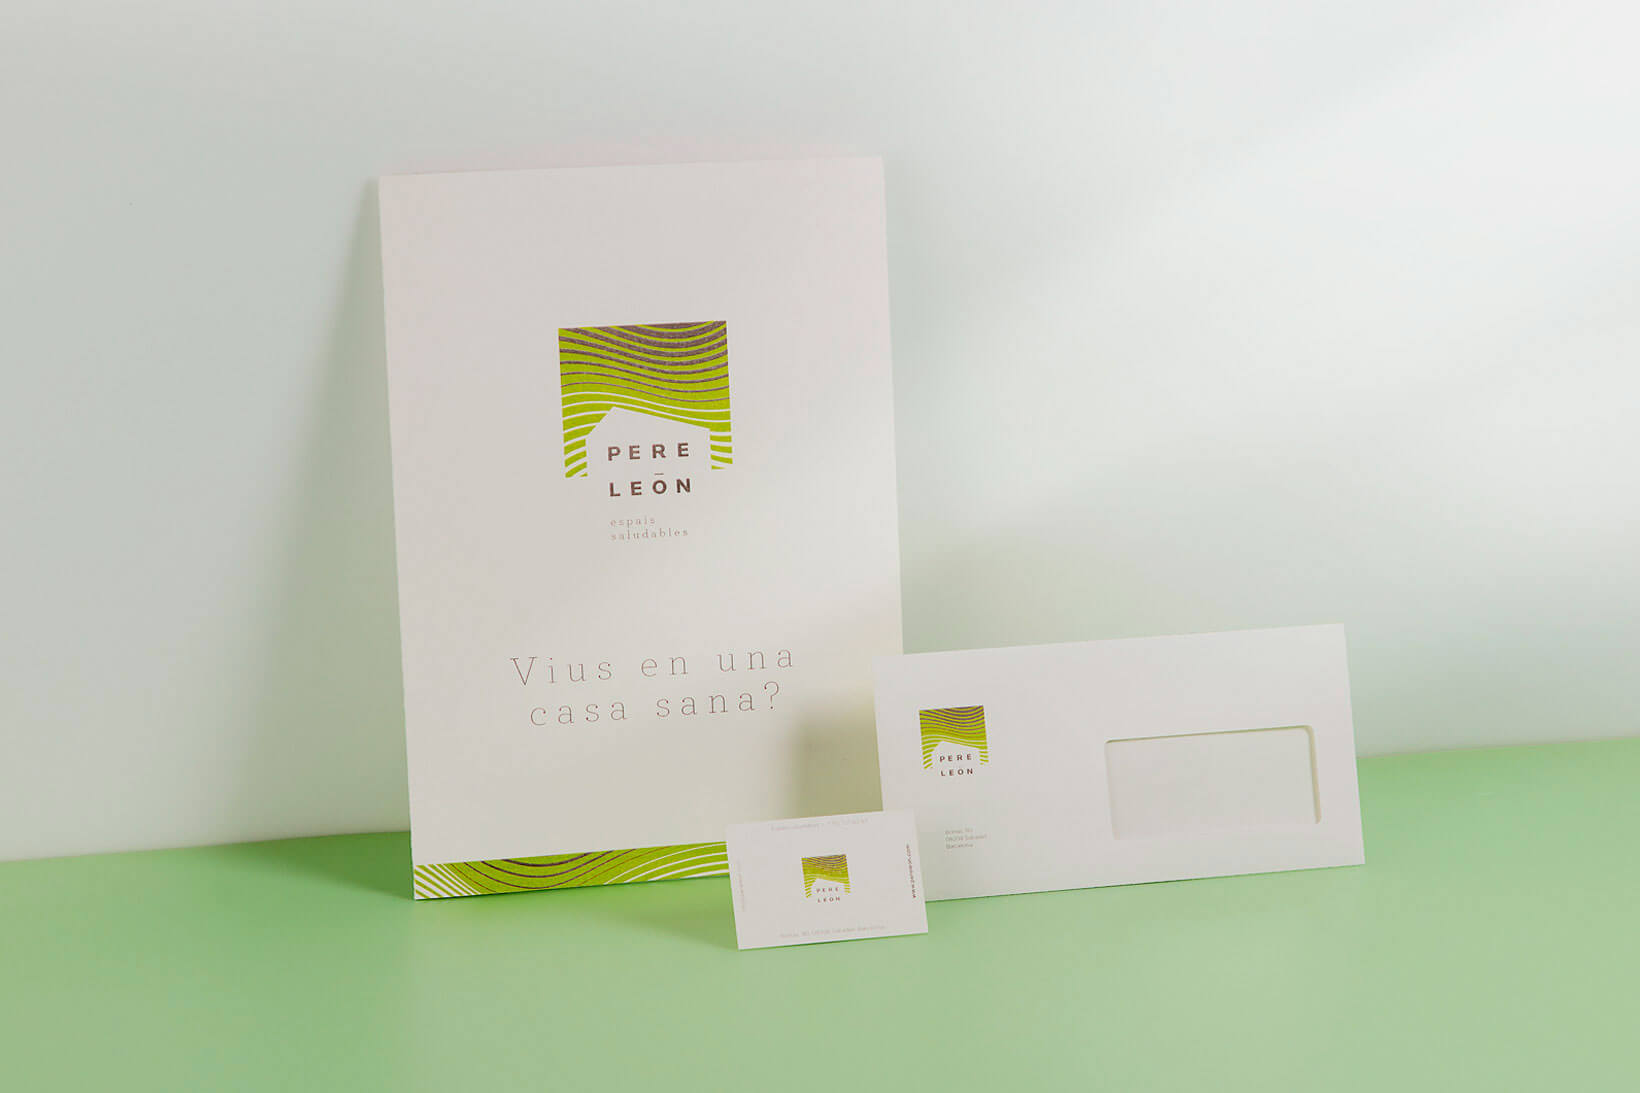 Corporate sheet, envelope and visit card for the bio-arquitecture studio Pere León